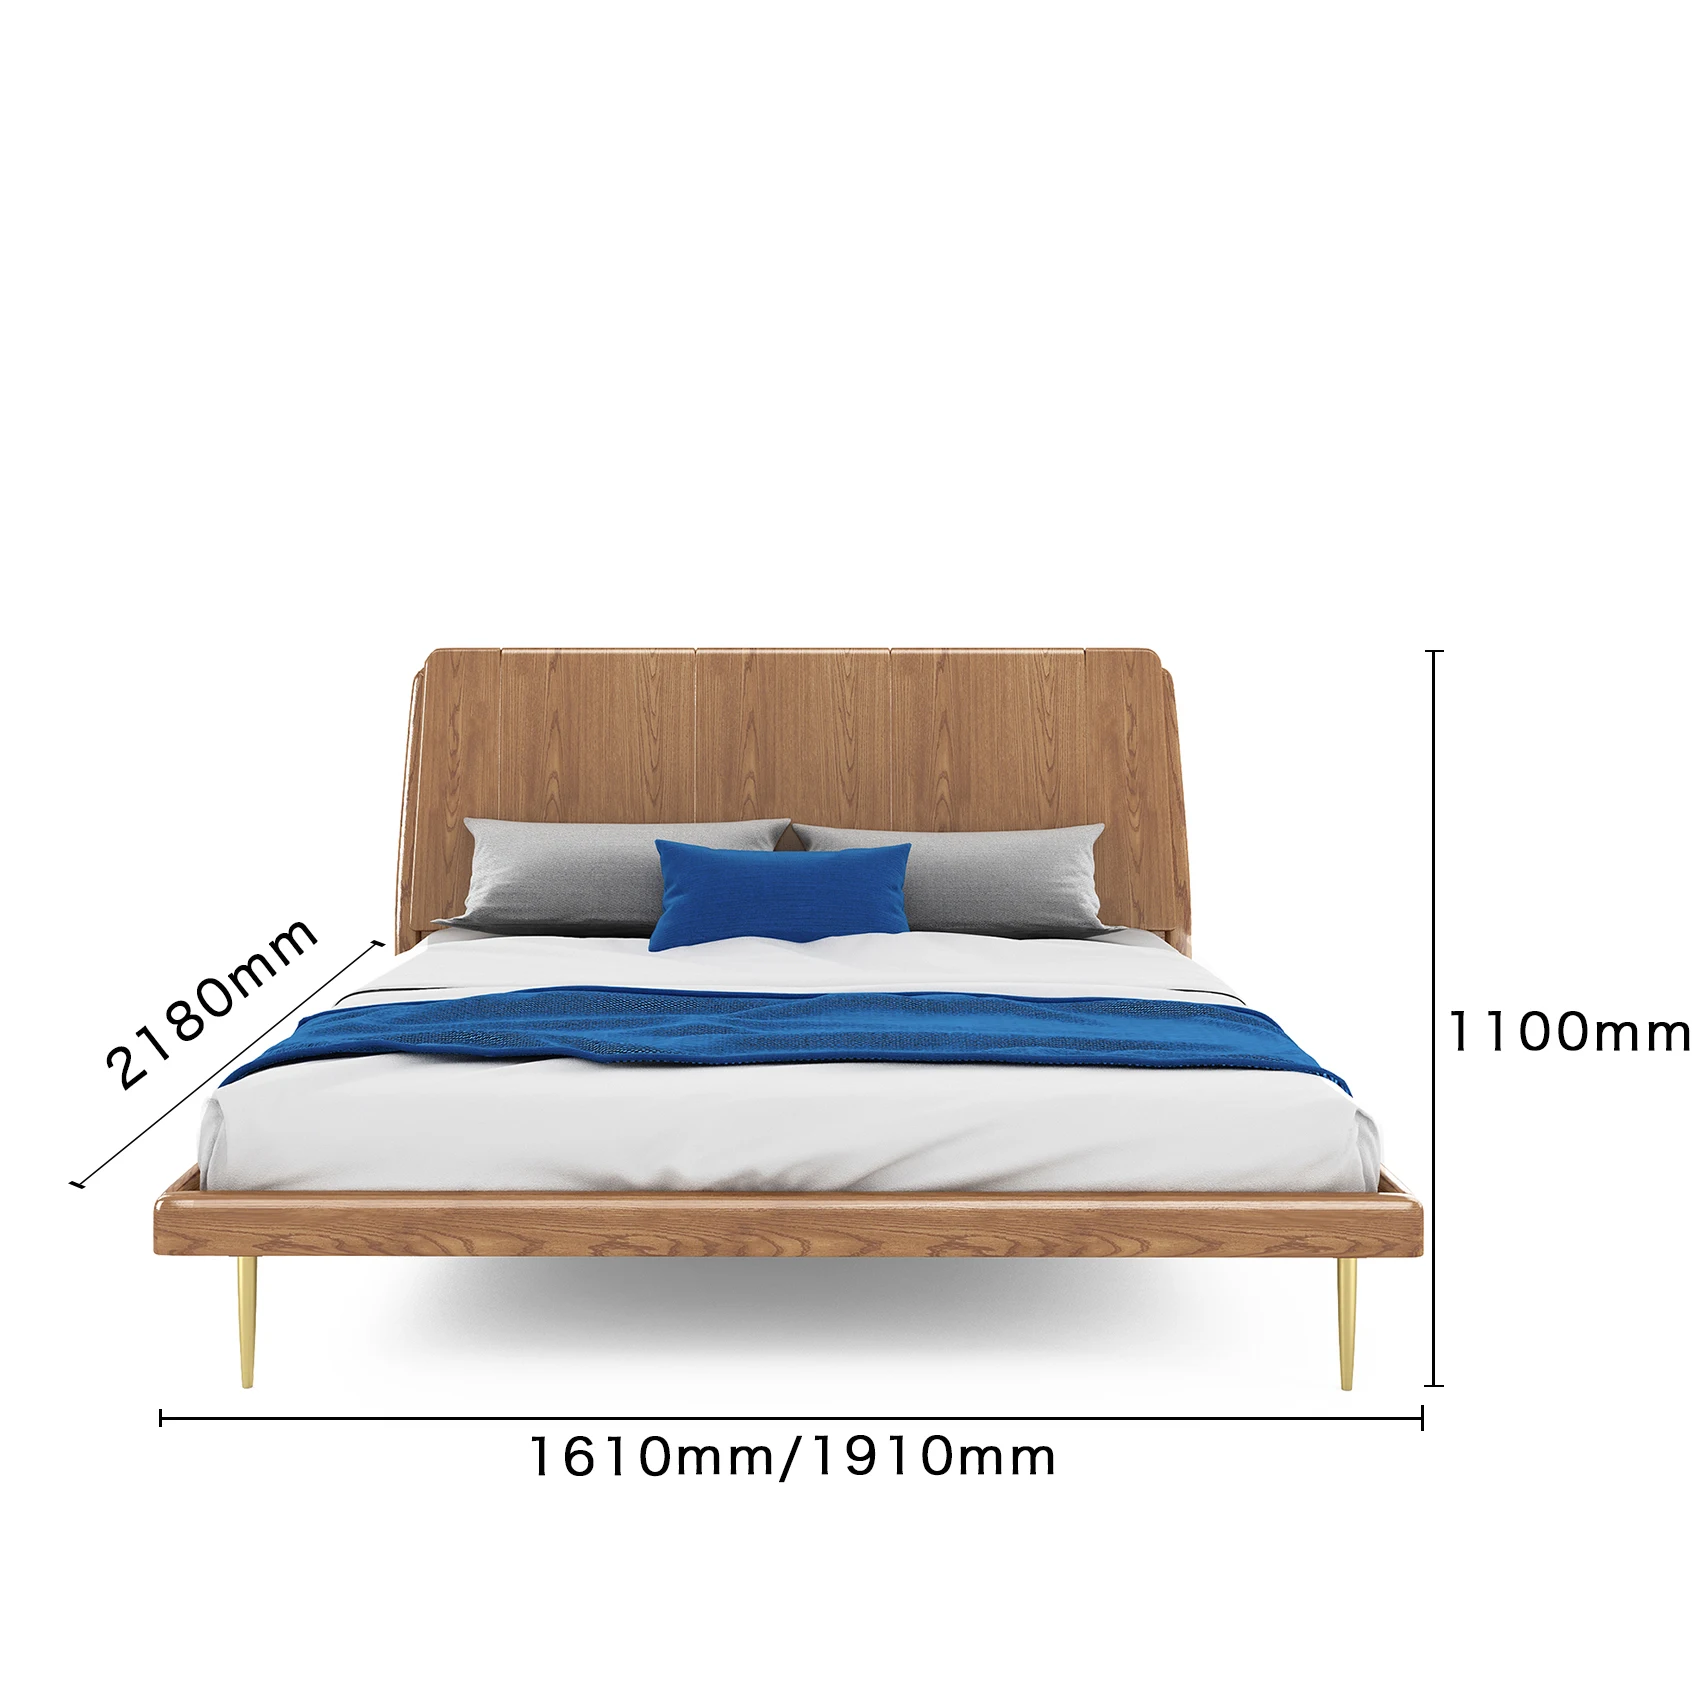 Luxury Double Queen King Size Bed Frame Modern Bedroom Sets Furniture Wooden Bed